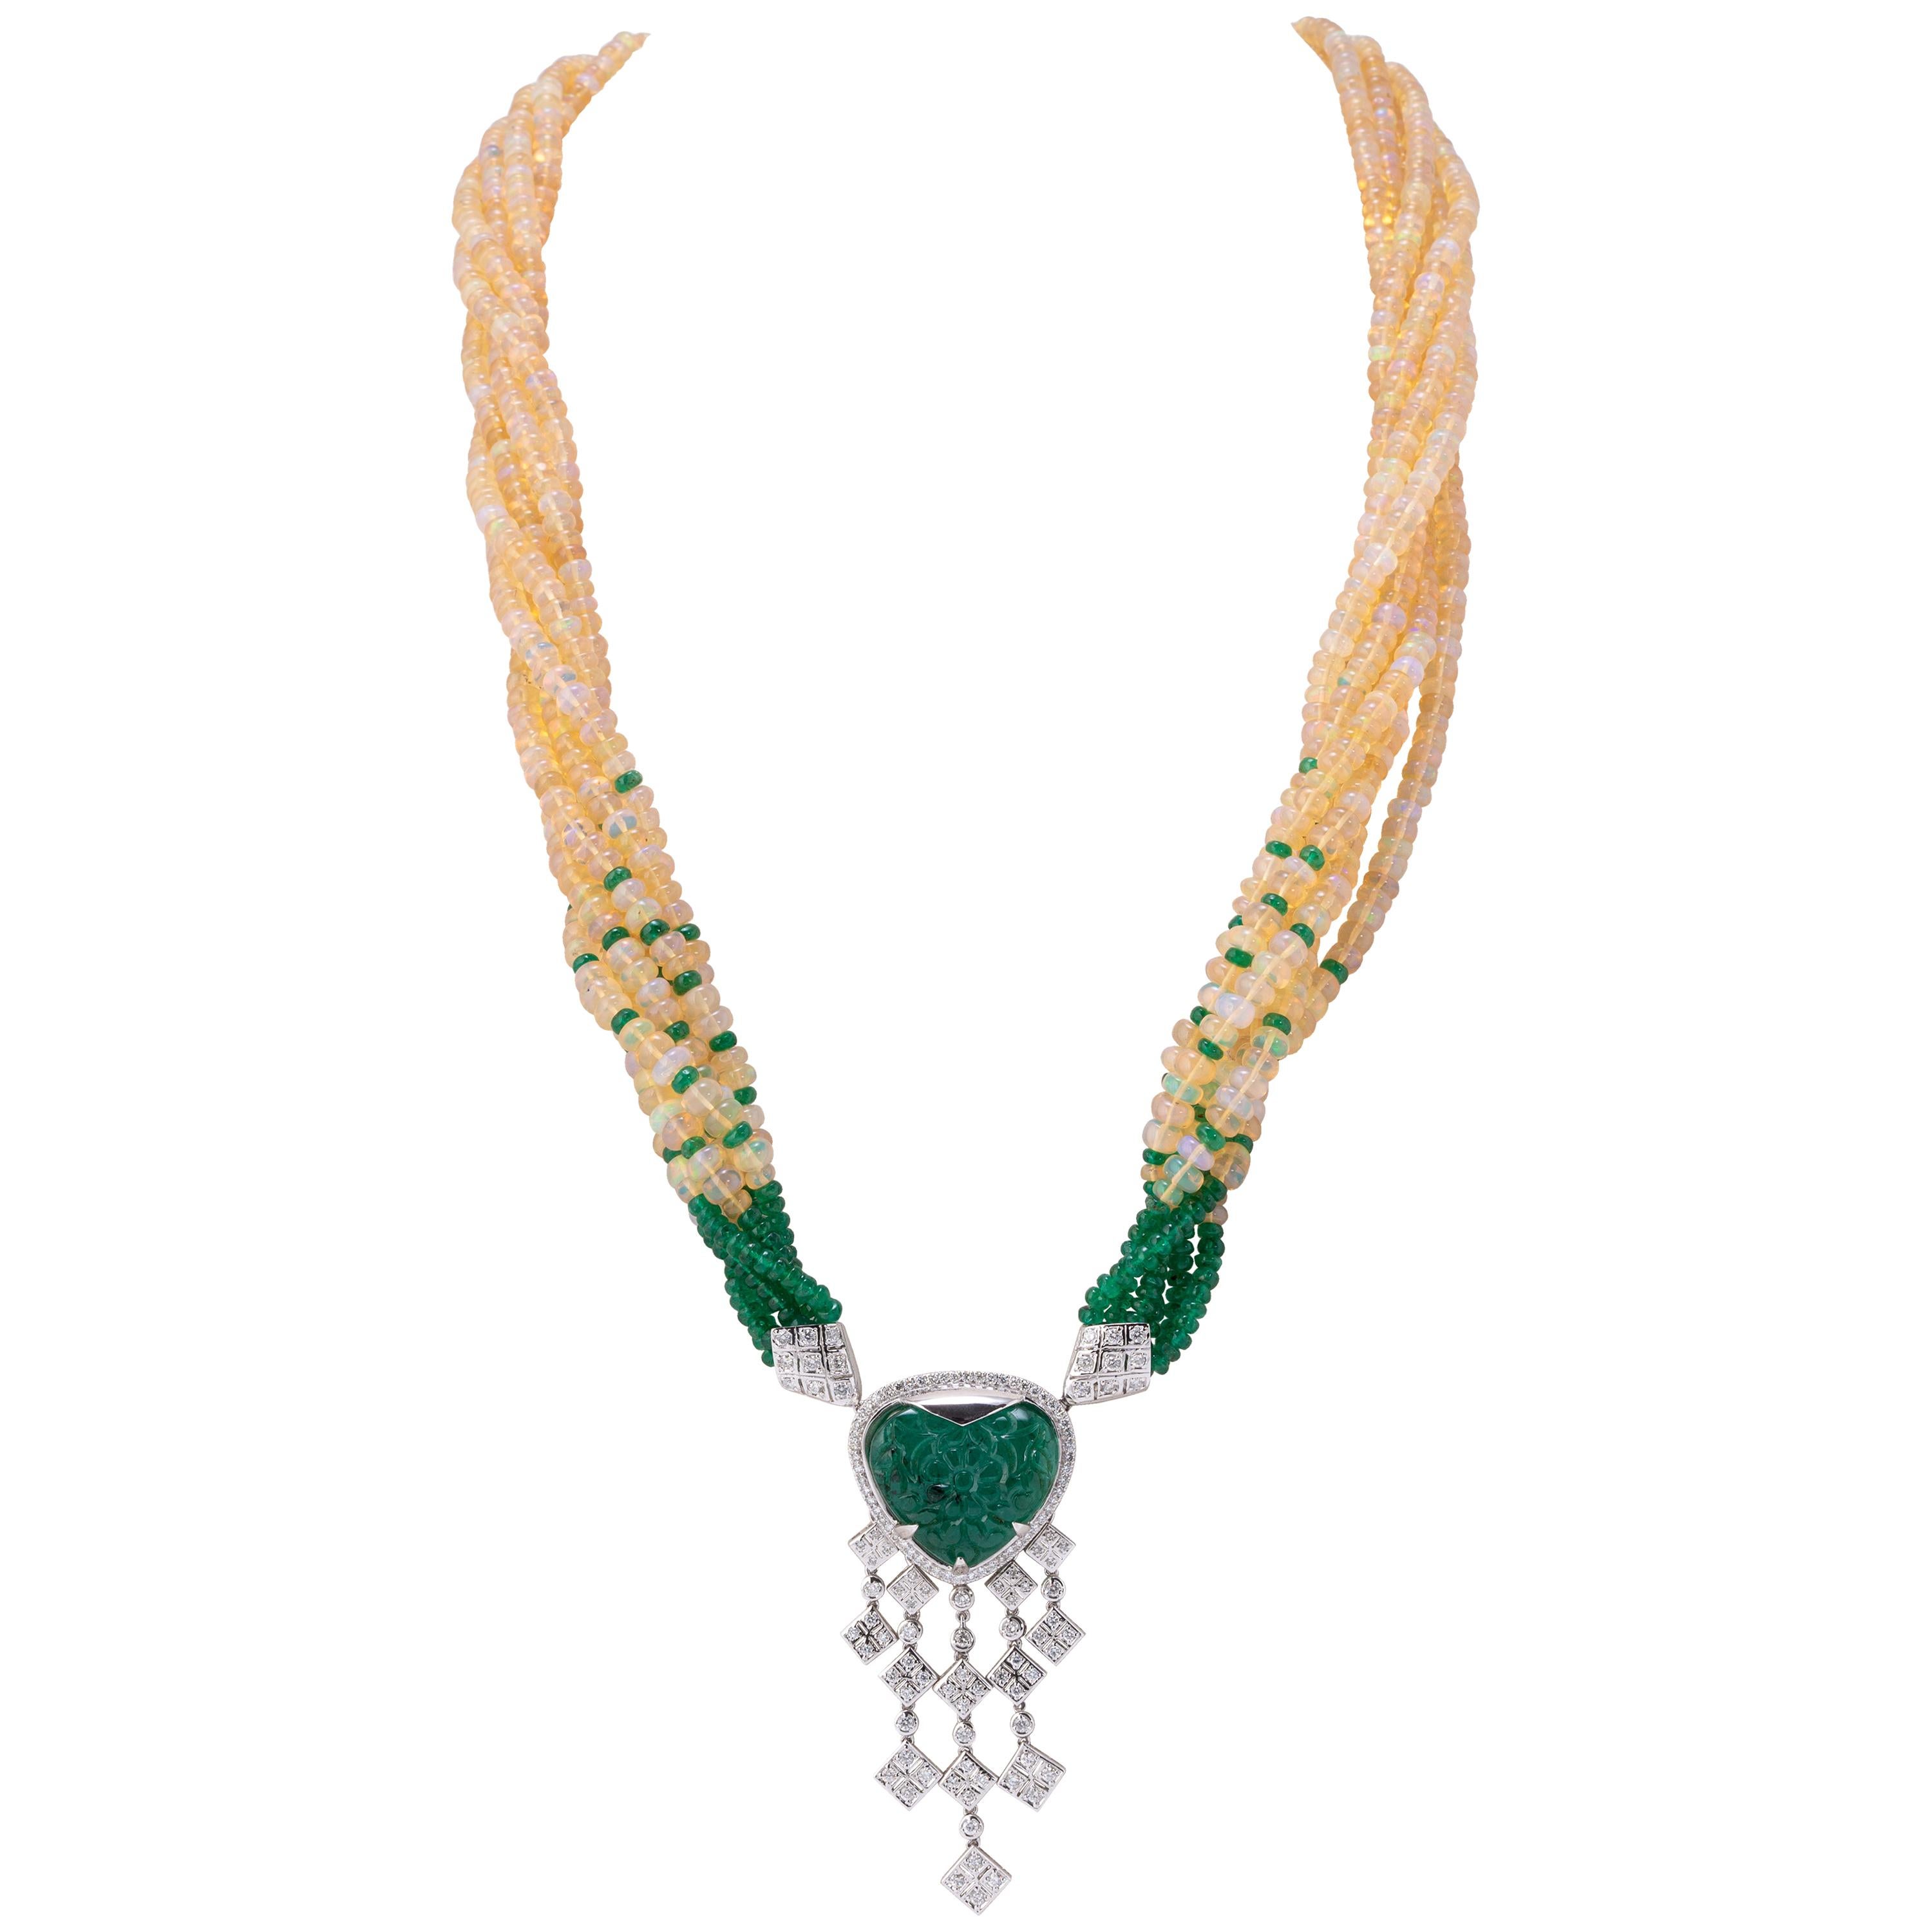 Carved Emerald and Opal Beads 18K Gold Multi-Strand Necklace